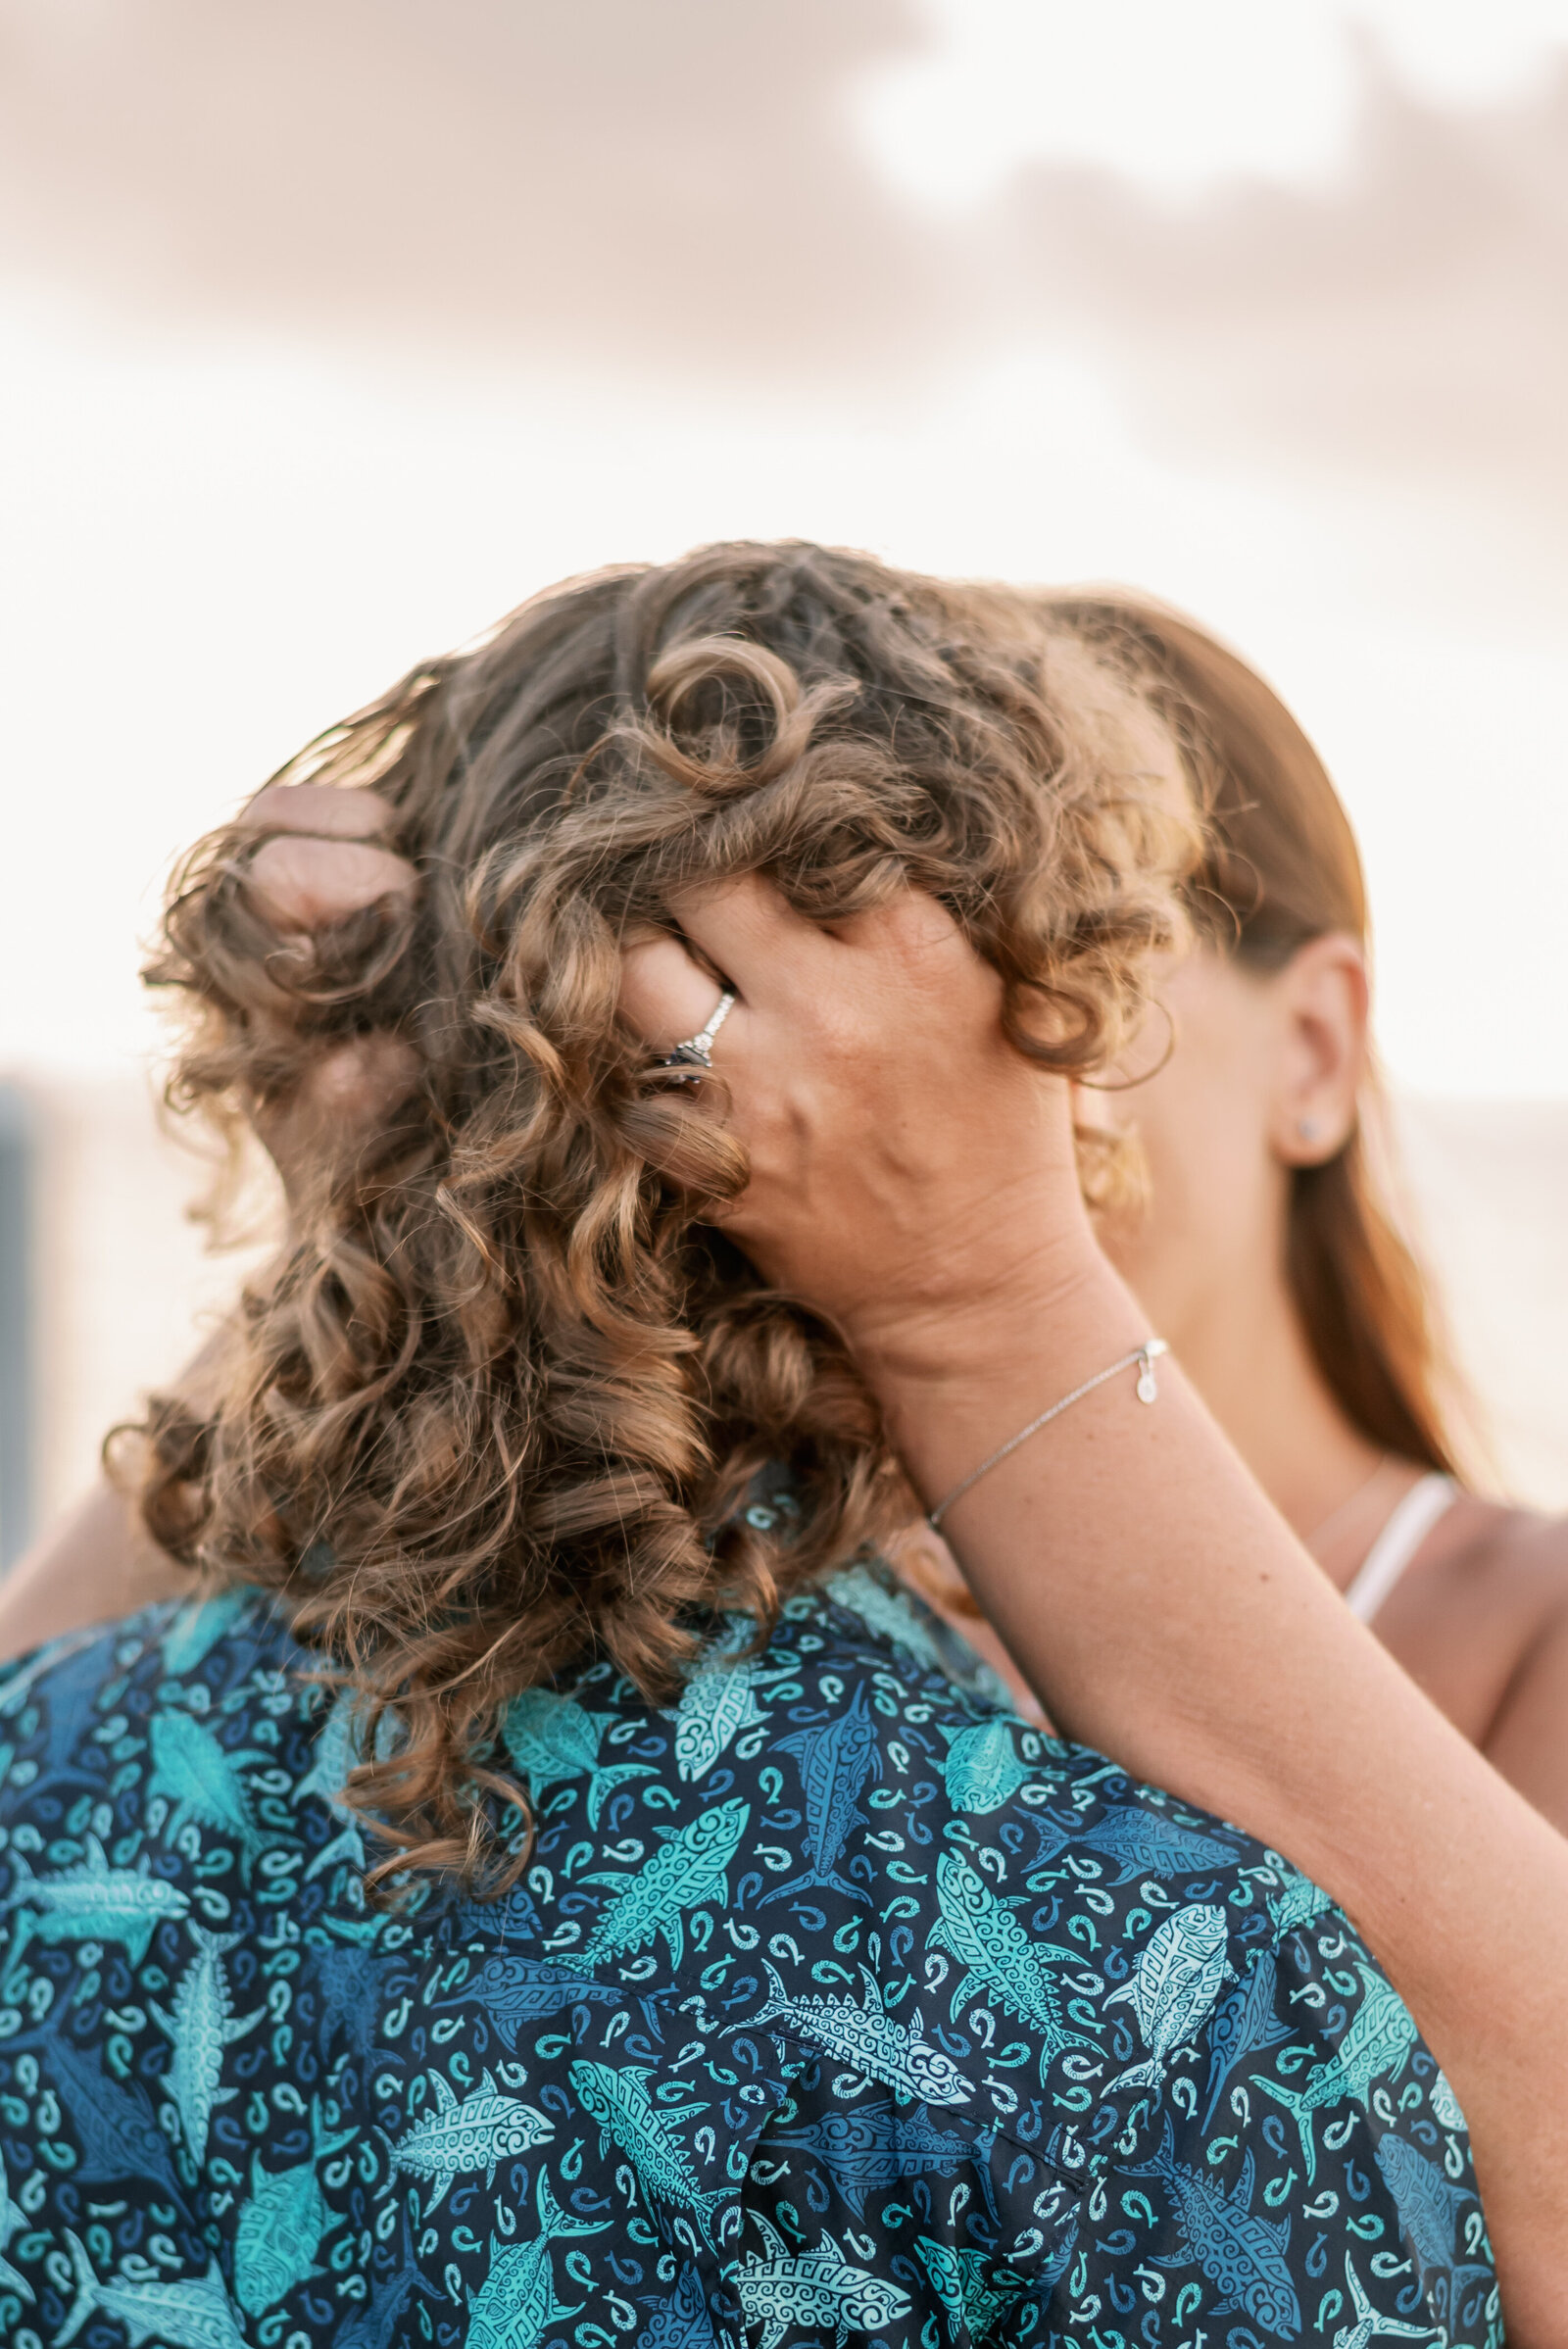 LGBTQ engaged couple kissing, we see one womans hands showing her engagement ring with her fingers entwined into the back of the other womans hair